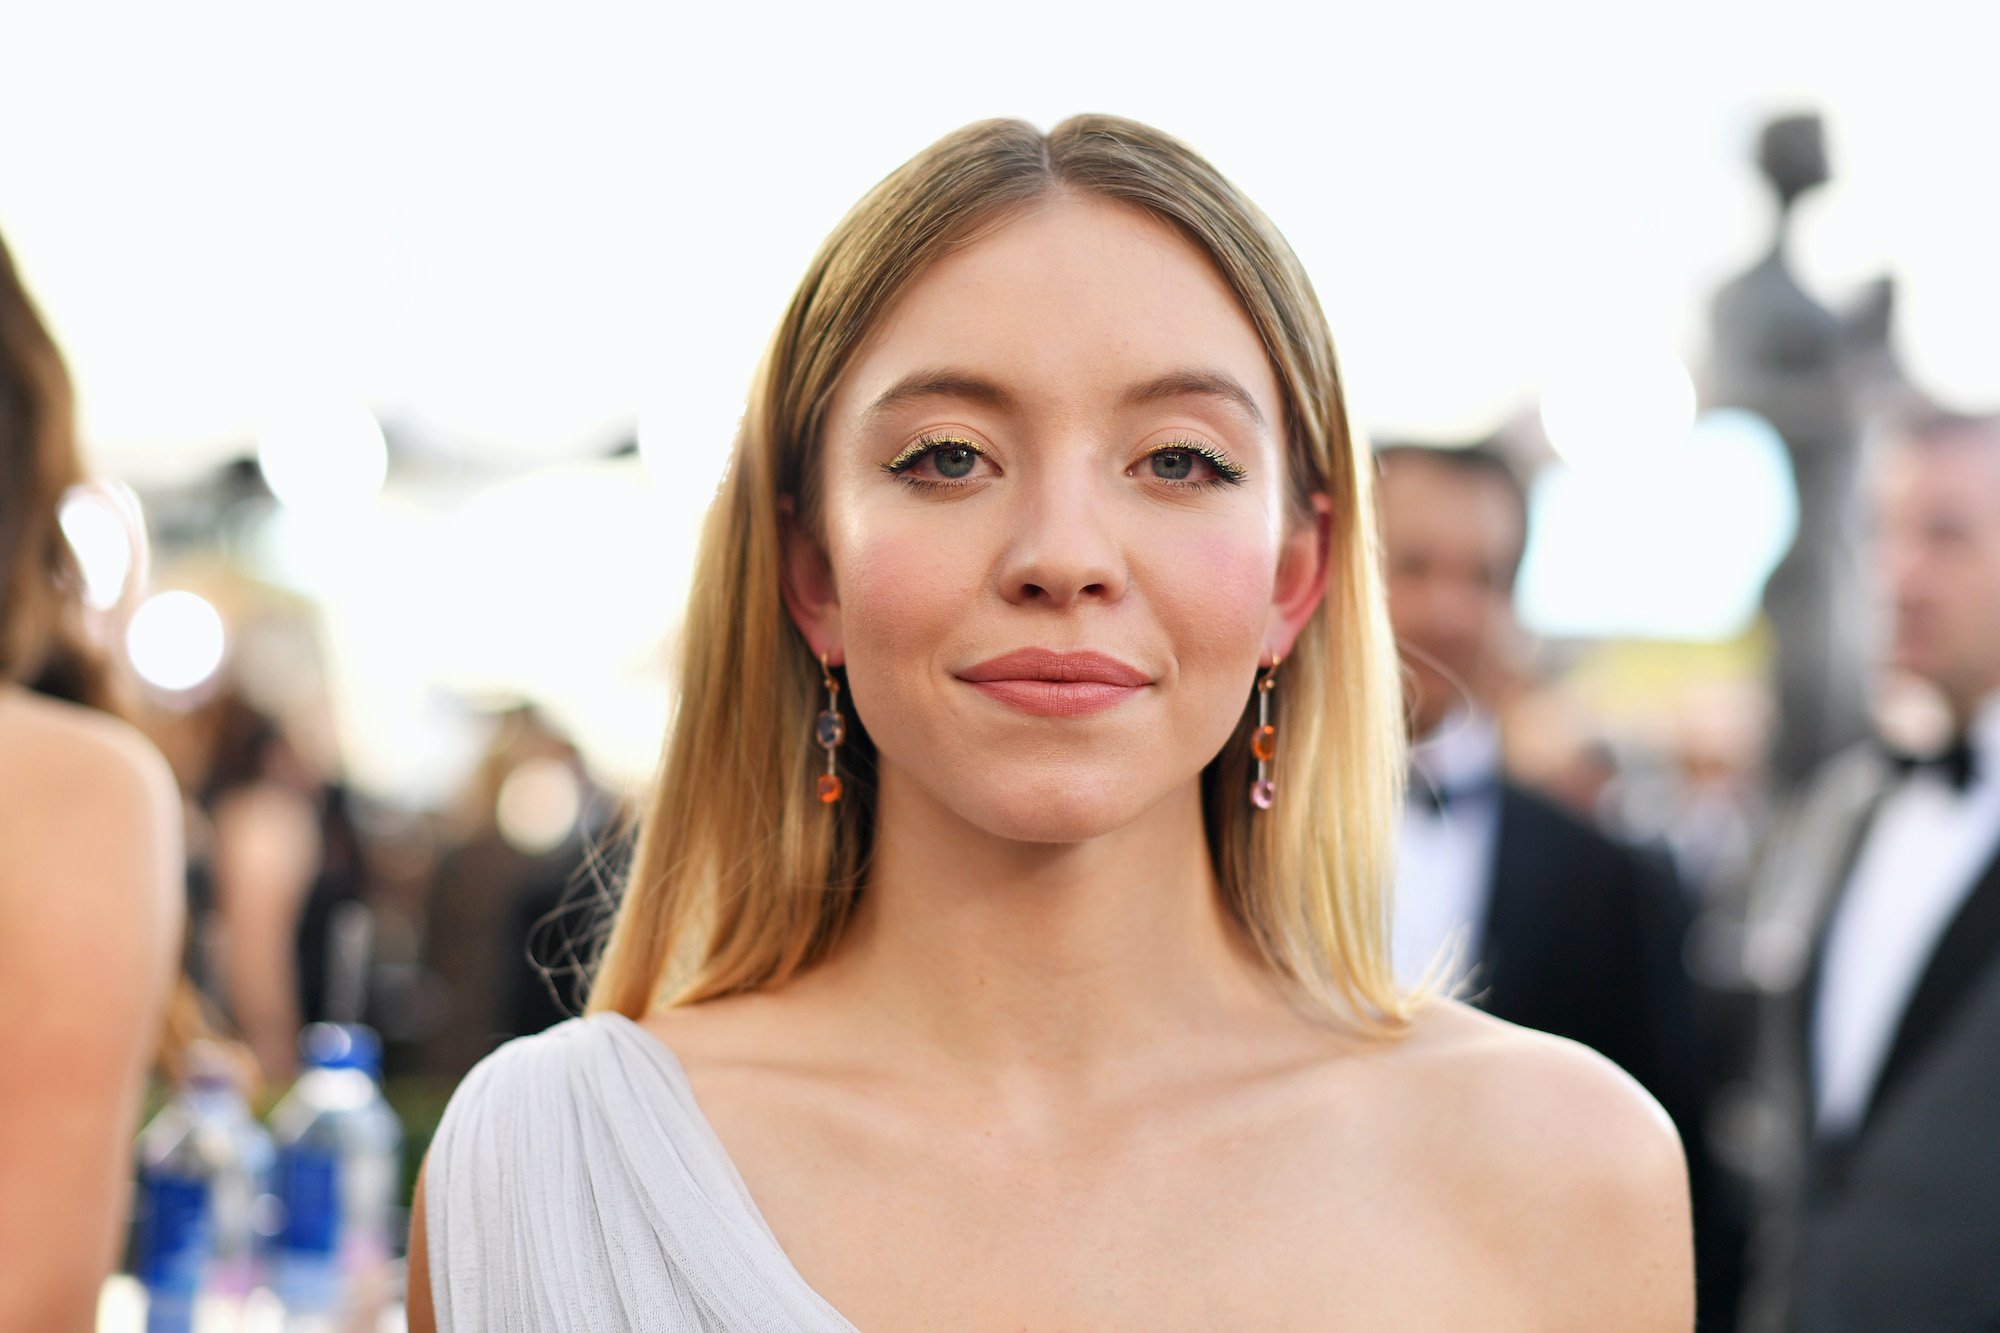 Sydney Sweeney smiling in front of a blurred crowd